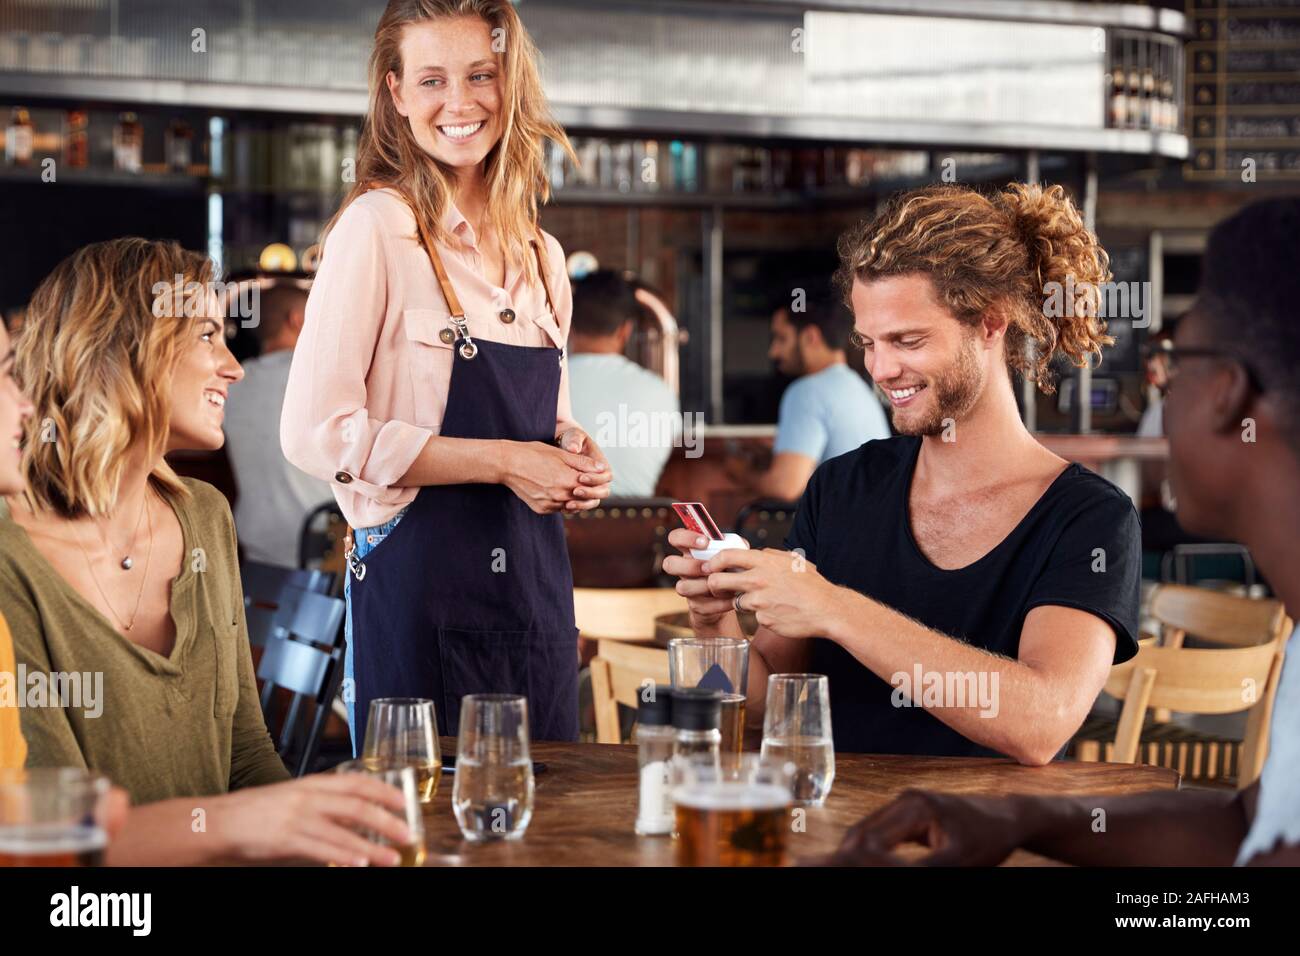 Waitress Holds Credit Card Machine As Customer Pays Bill In Bar Restaurant Stock Photo